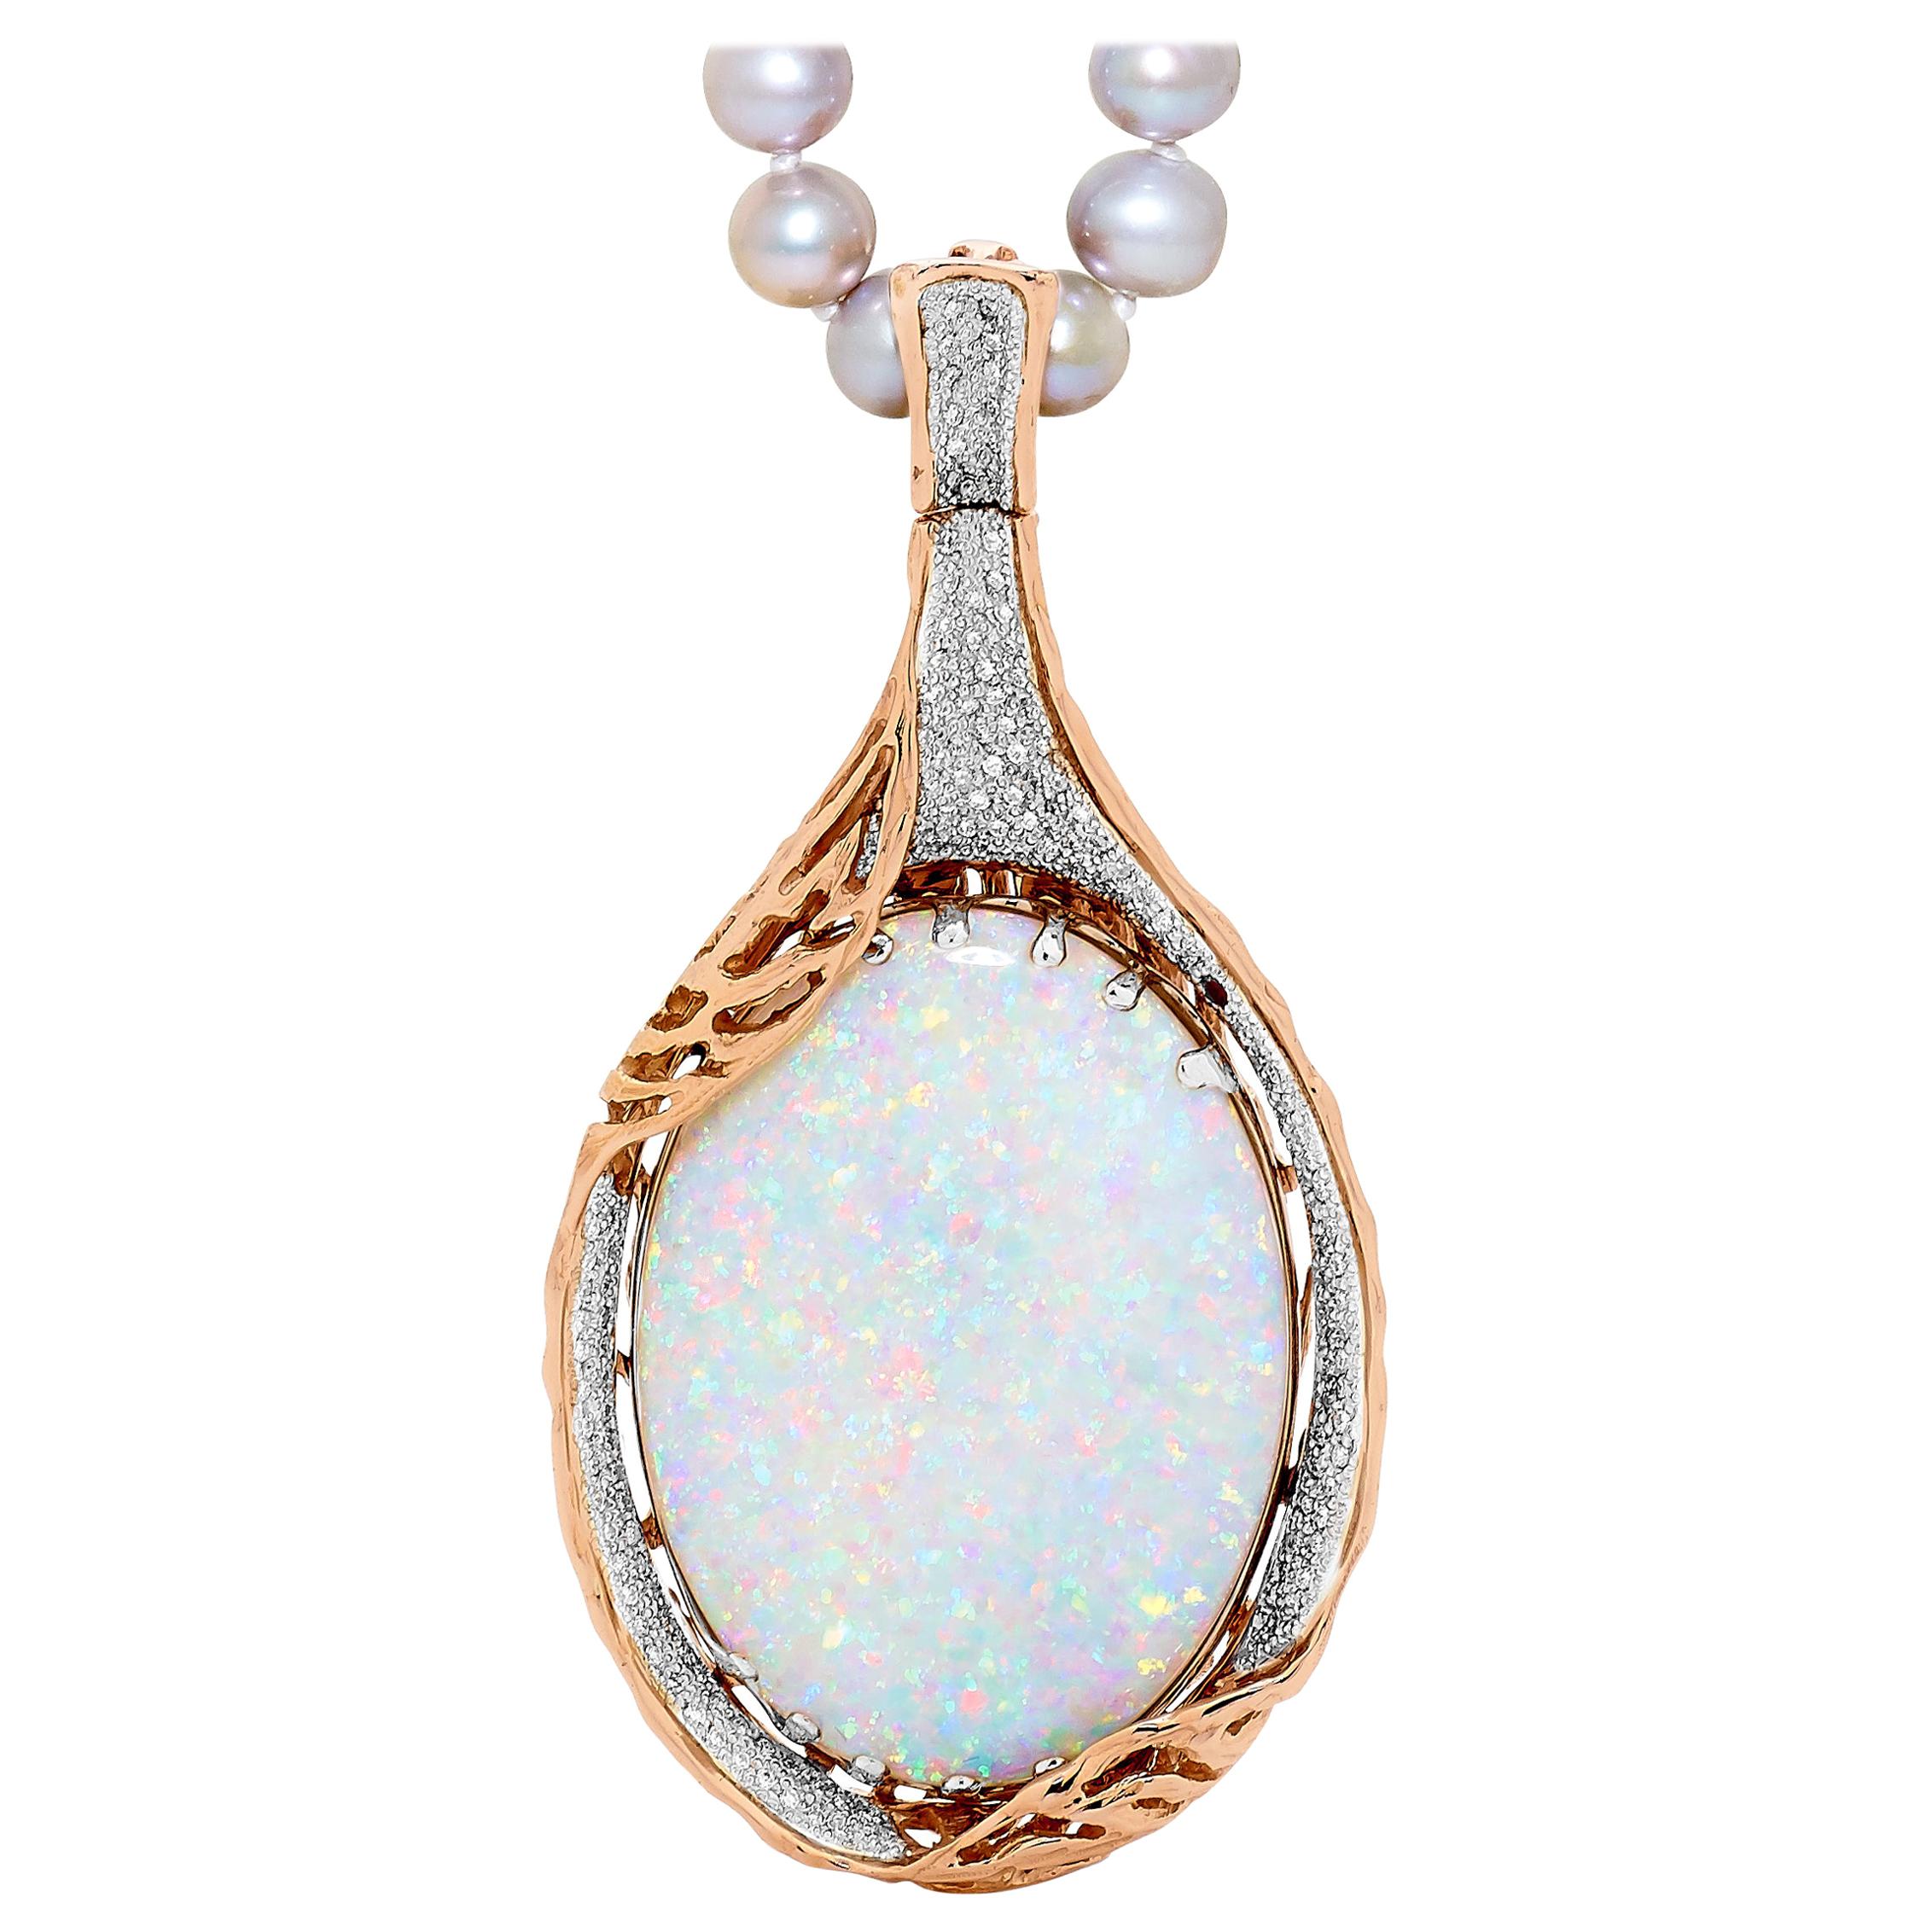 Australian 67.32ct Boulder Opal and Diamond Pendant Necklace in 18K Rose Gold